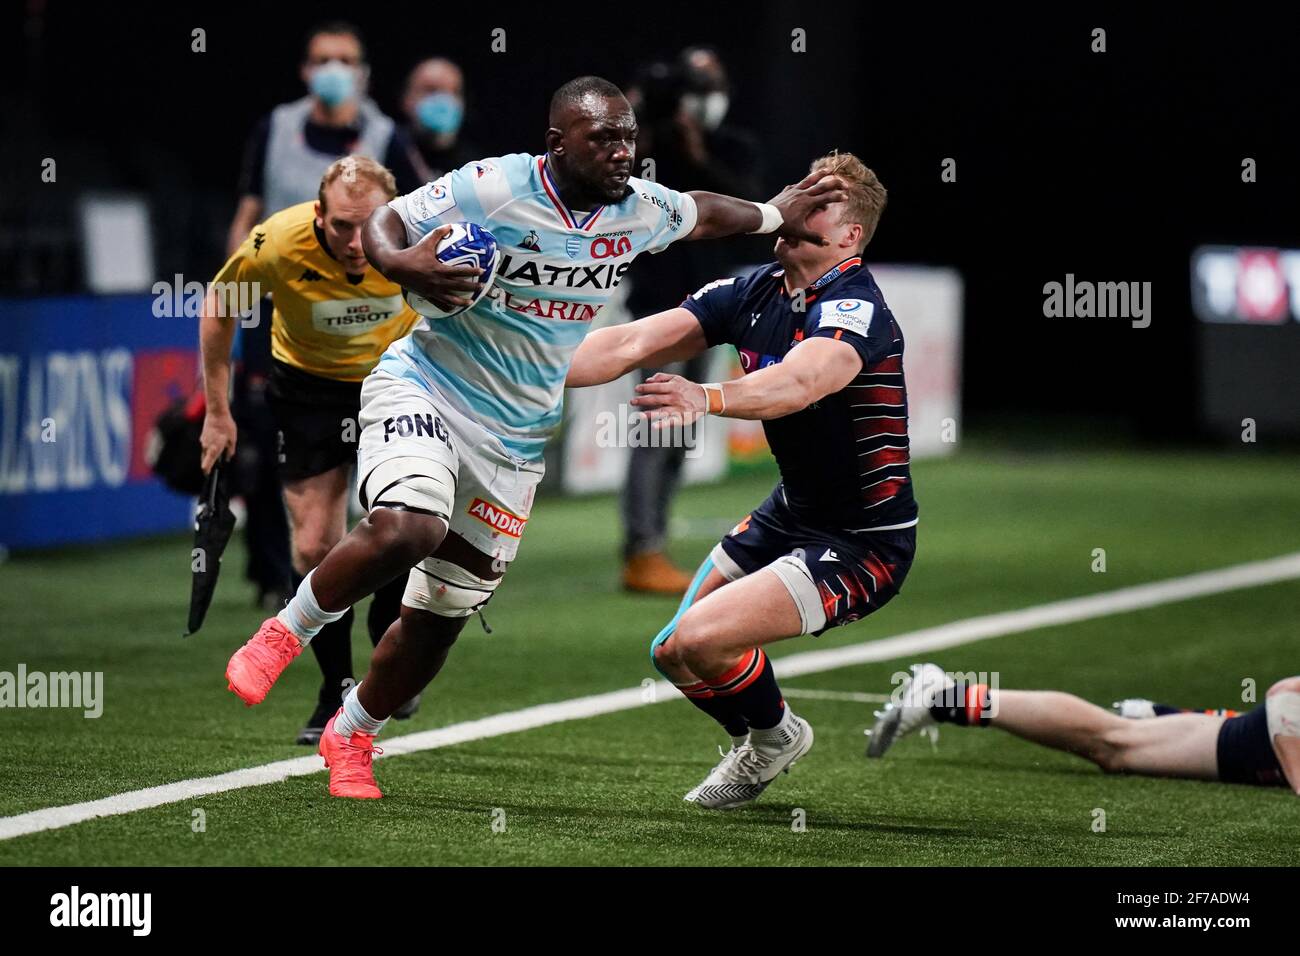 Jordan Joseph (R92) in action with a spectacular Hand-off during the 8th  Finale match of Champions Cup between Racing 92 (R92) and Edinburgh Rugby  (ER) at the Paris La Defense Arena, in